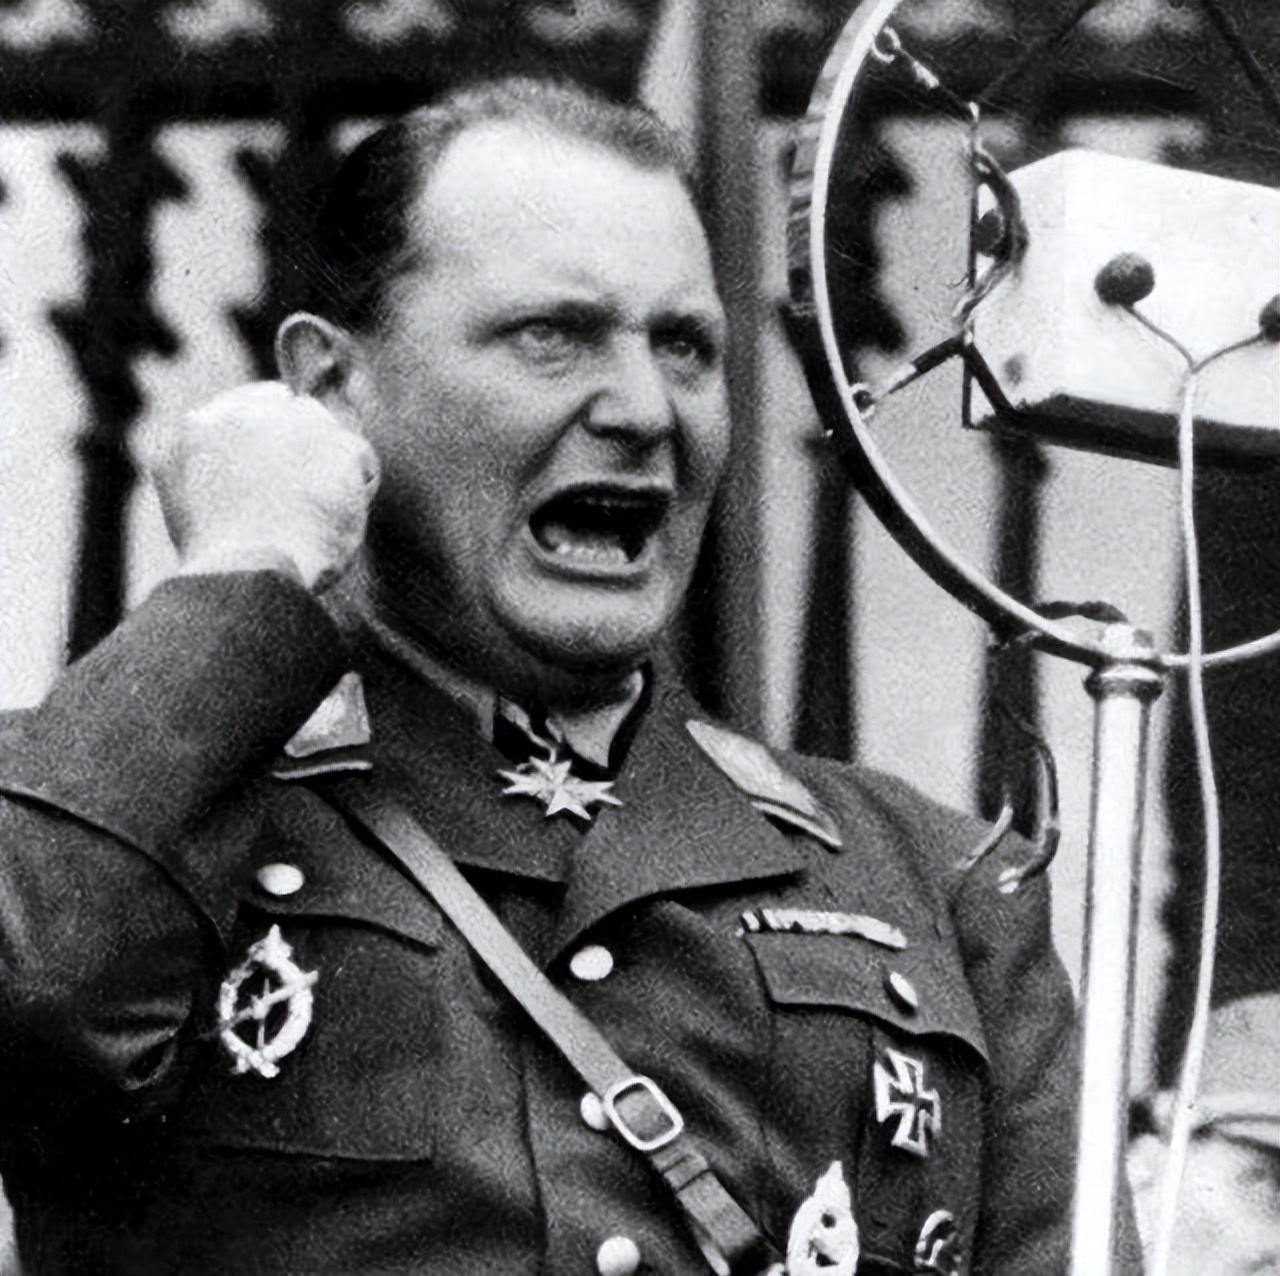 Nazi Germany S Reich Marshal Goring In The Second Half Of His Life The Person Who Won The Most